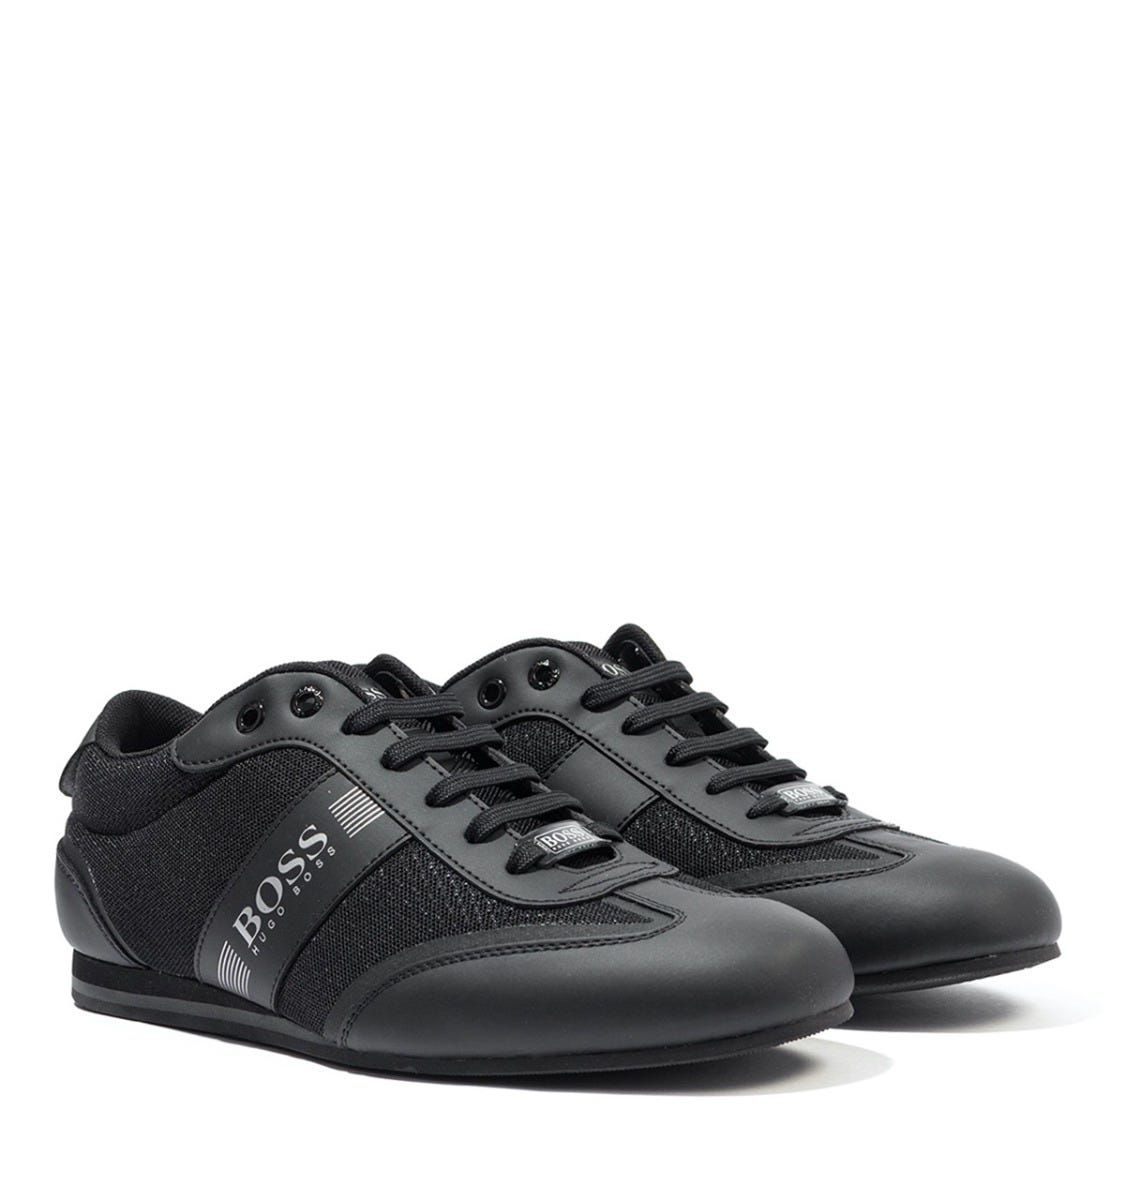 A pair of low profile trainers from BOSS. Crafted from smooth matte leather and mesh synthetic uppers, featuring a seven eyelet lace up closure, a branded tongue, and tonal stitching throughout. With a contrasting pull tab to the heel, and a tone-in-tone toe cap. The trainers sport textured treads for superior grip, finished with signature BOSS branding to the outer face and a reinforced heel.Low Profile, Matte Leather & Syntheic Mesh Uppers, Seven Eyelet Lace up, Tonal Stitching , Reinforced Heel, Contrast Heel Pull Tab, Textured Treads, BOSS Branding.